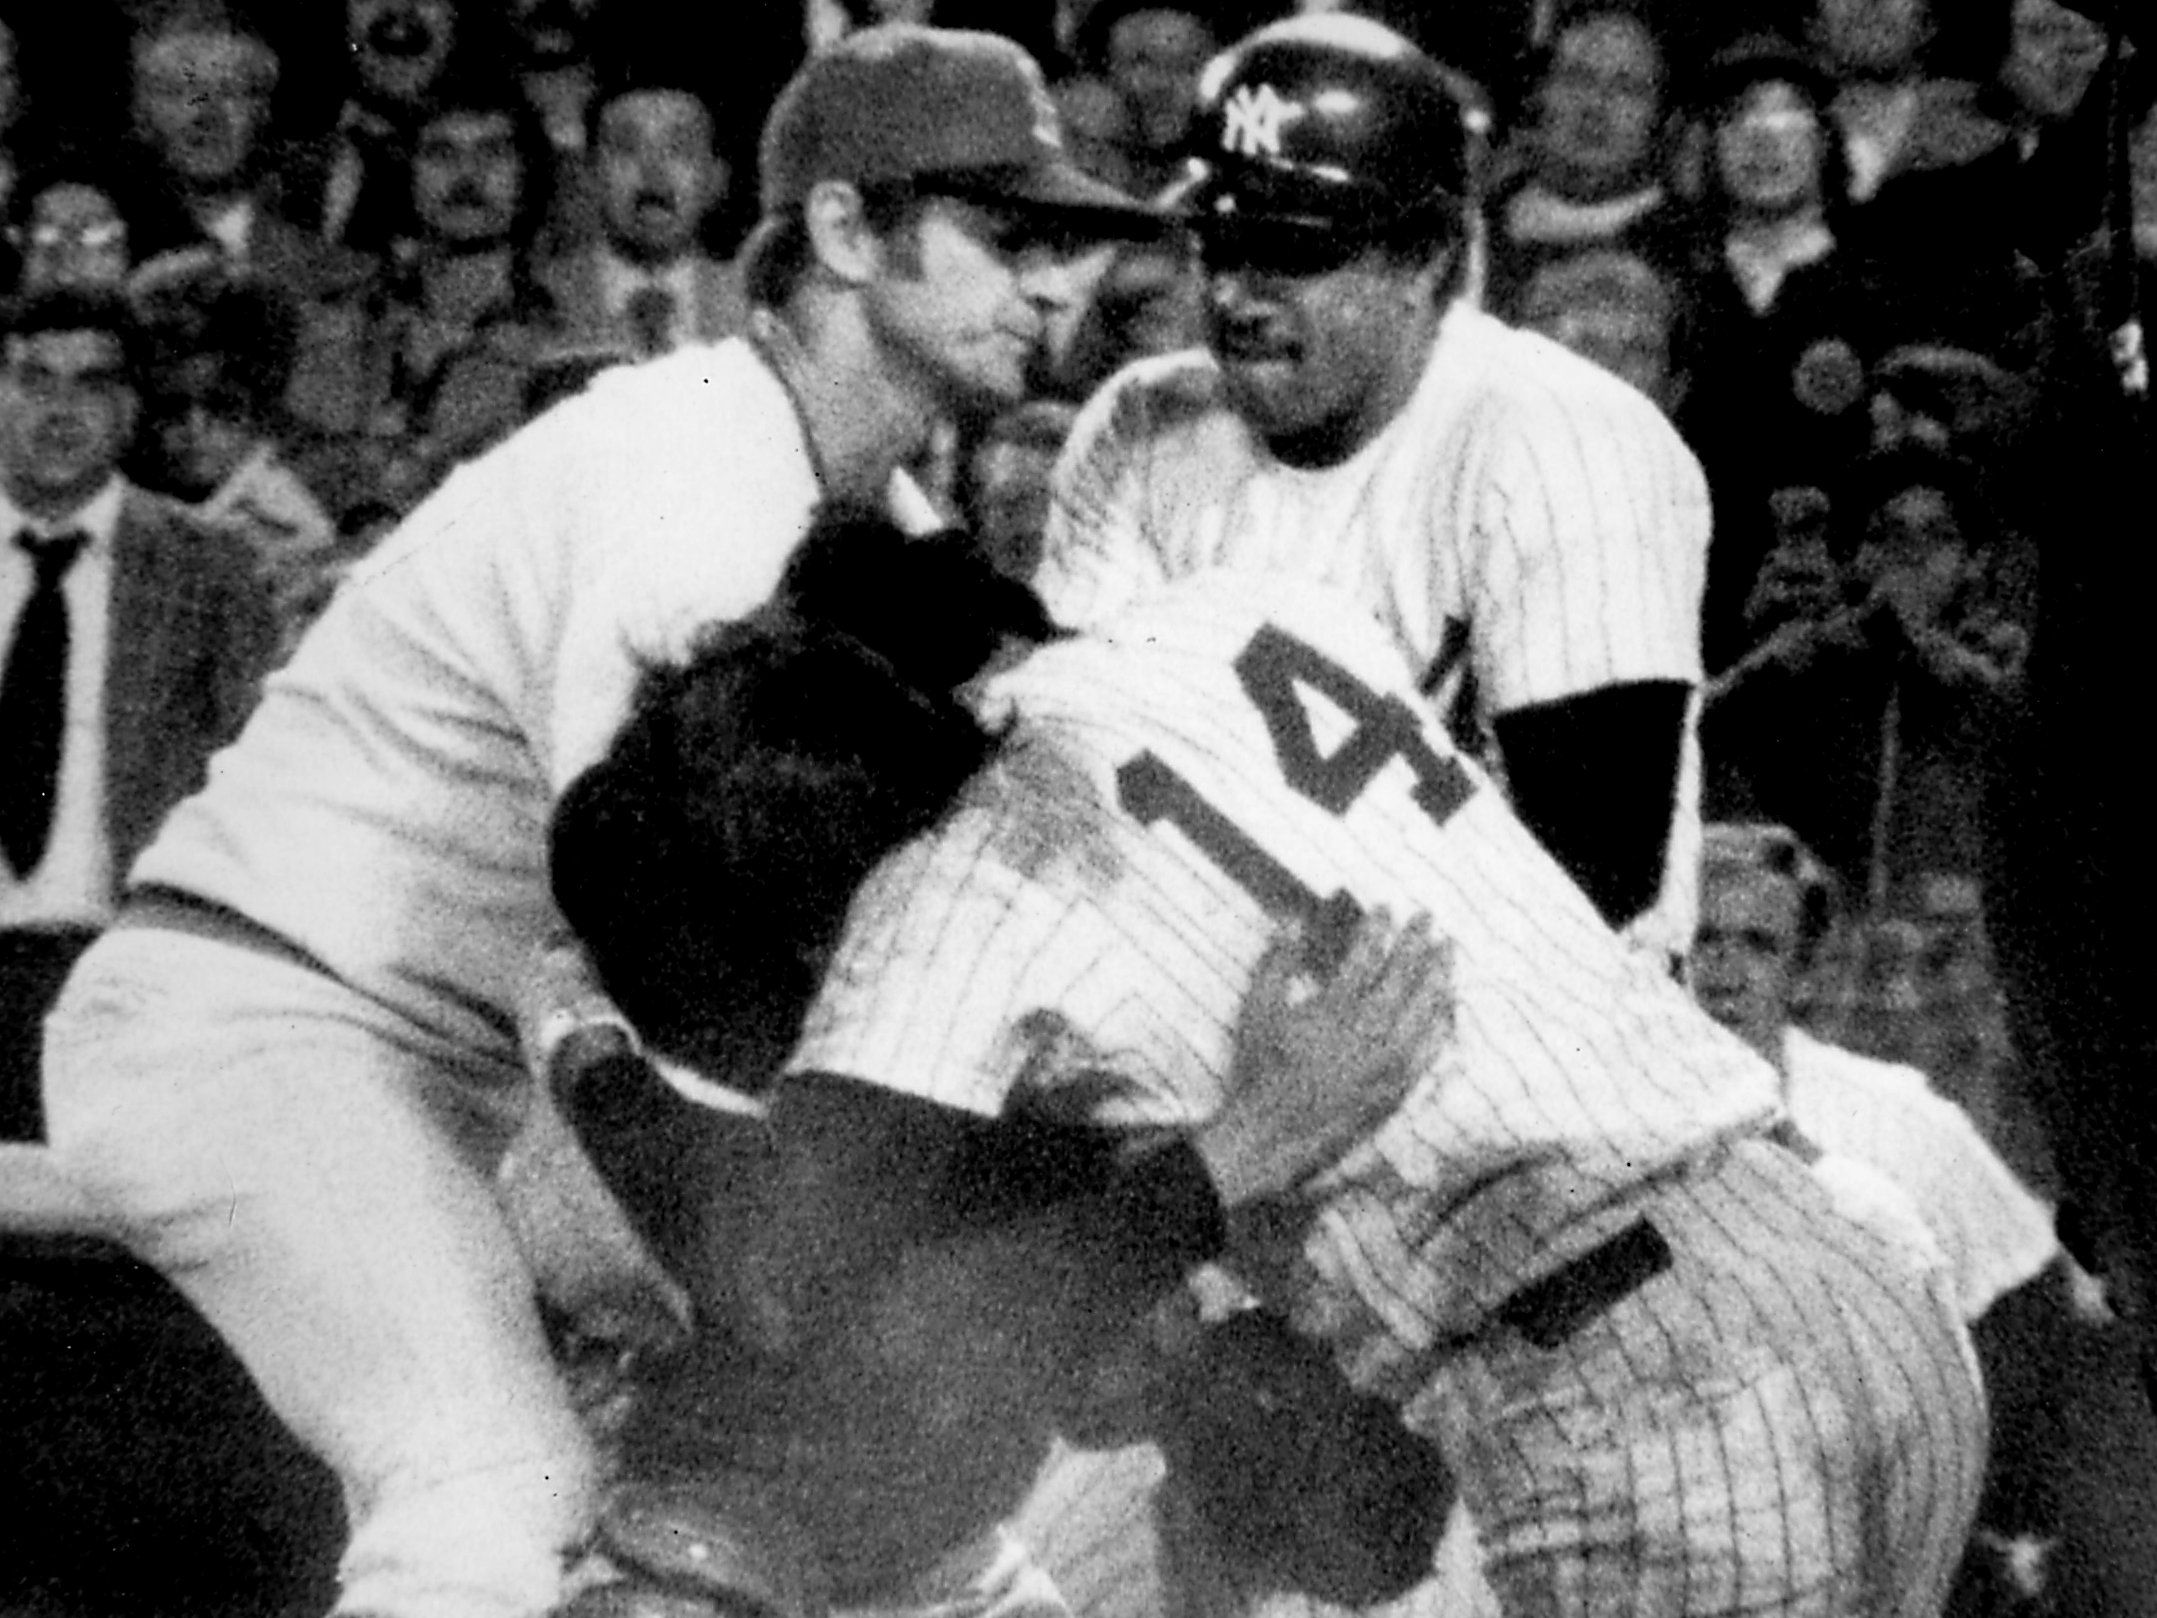 Boston Red Sox catcher Carlton Fisk tags out New York Yankees player Lou  Piniella at Yankee Stadium. 1976